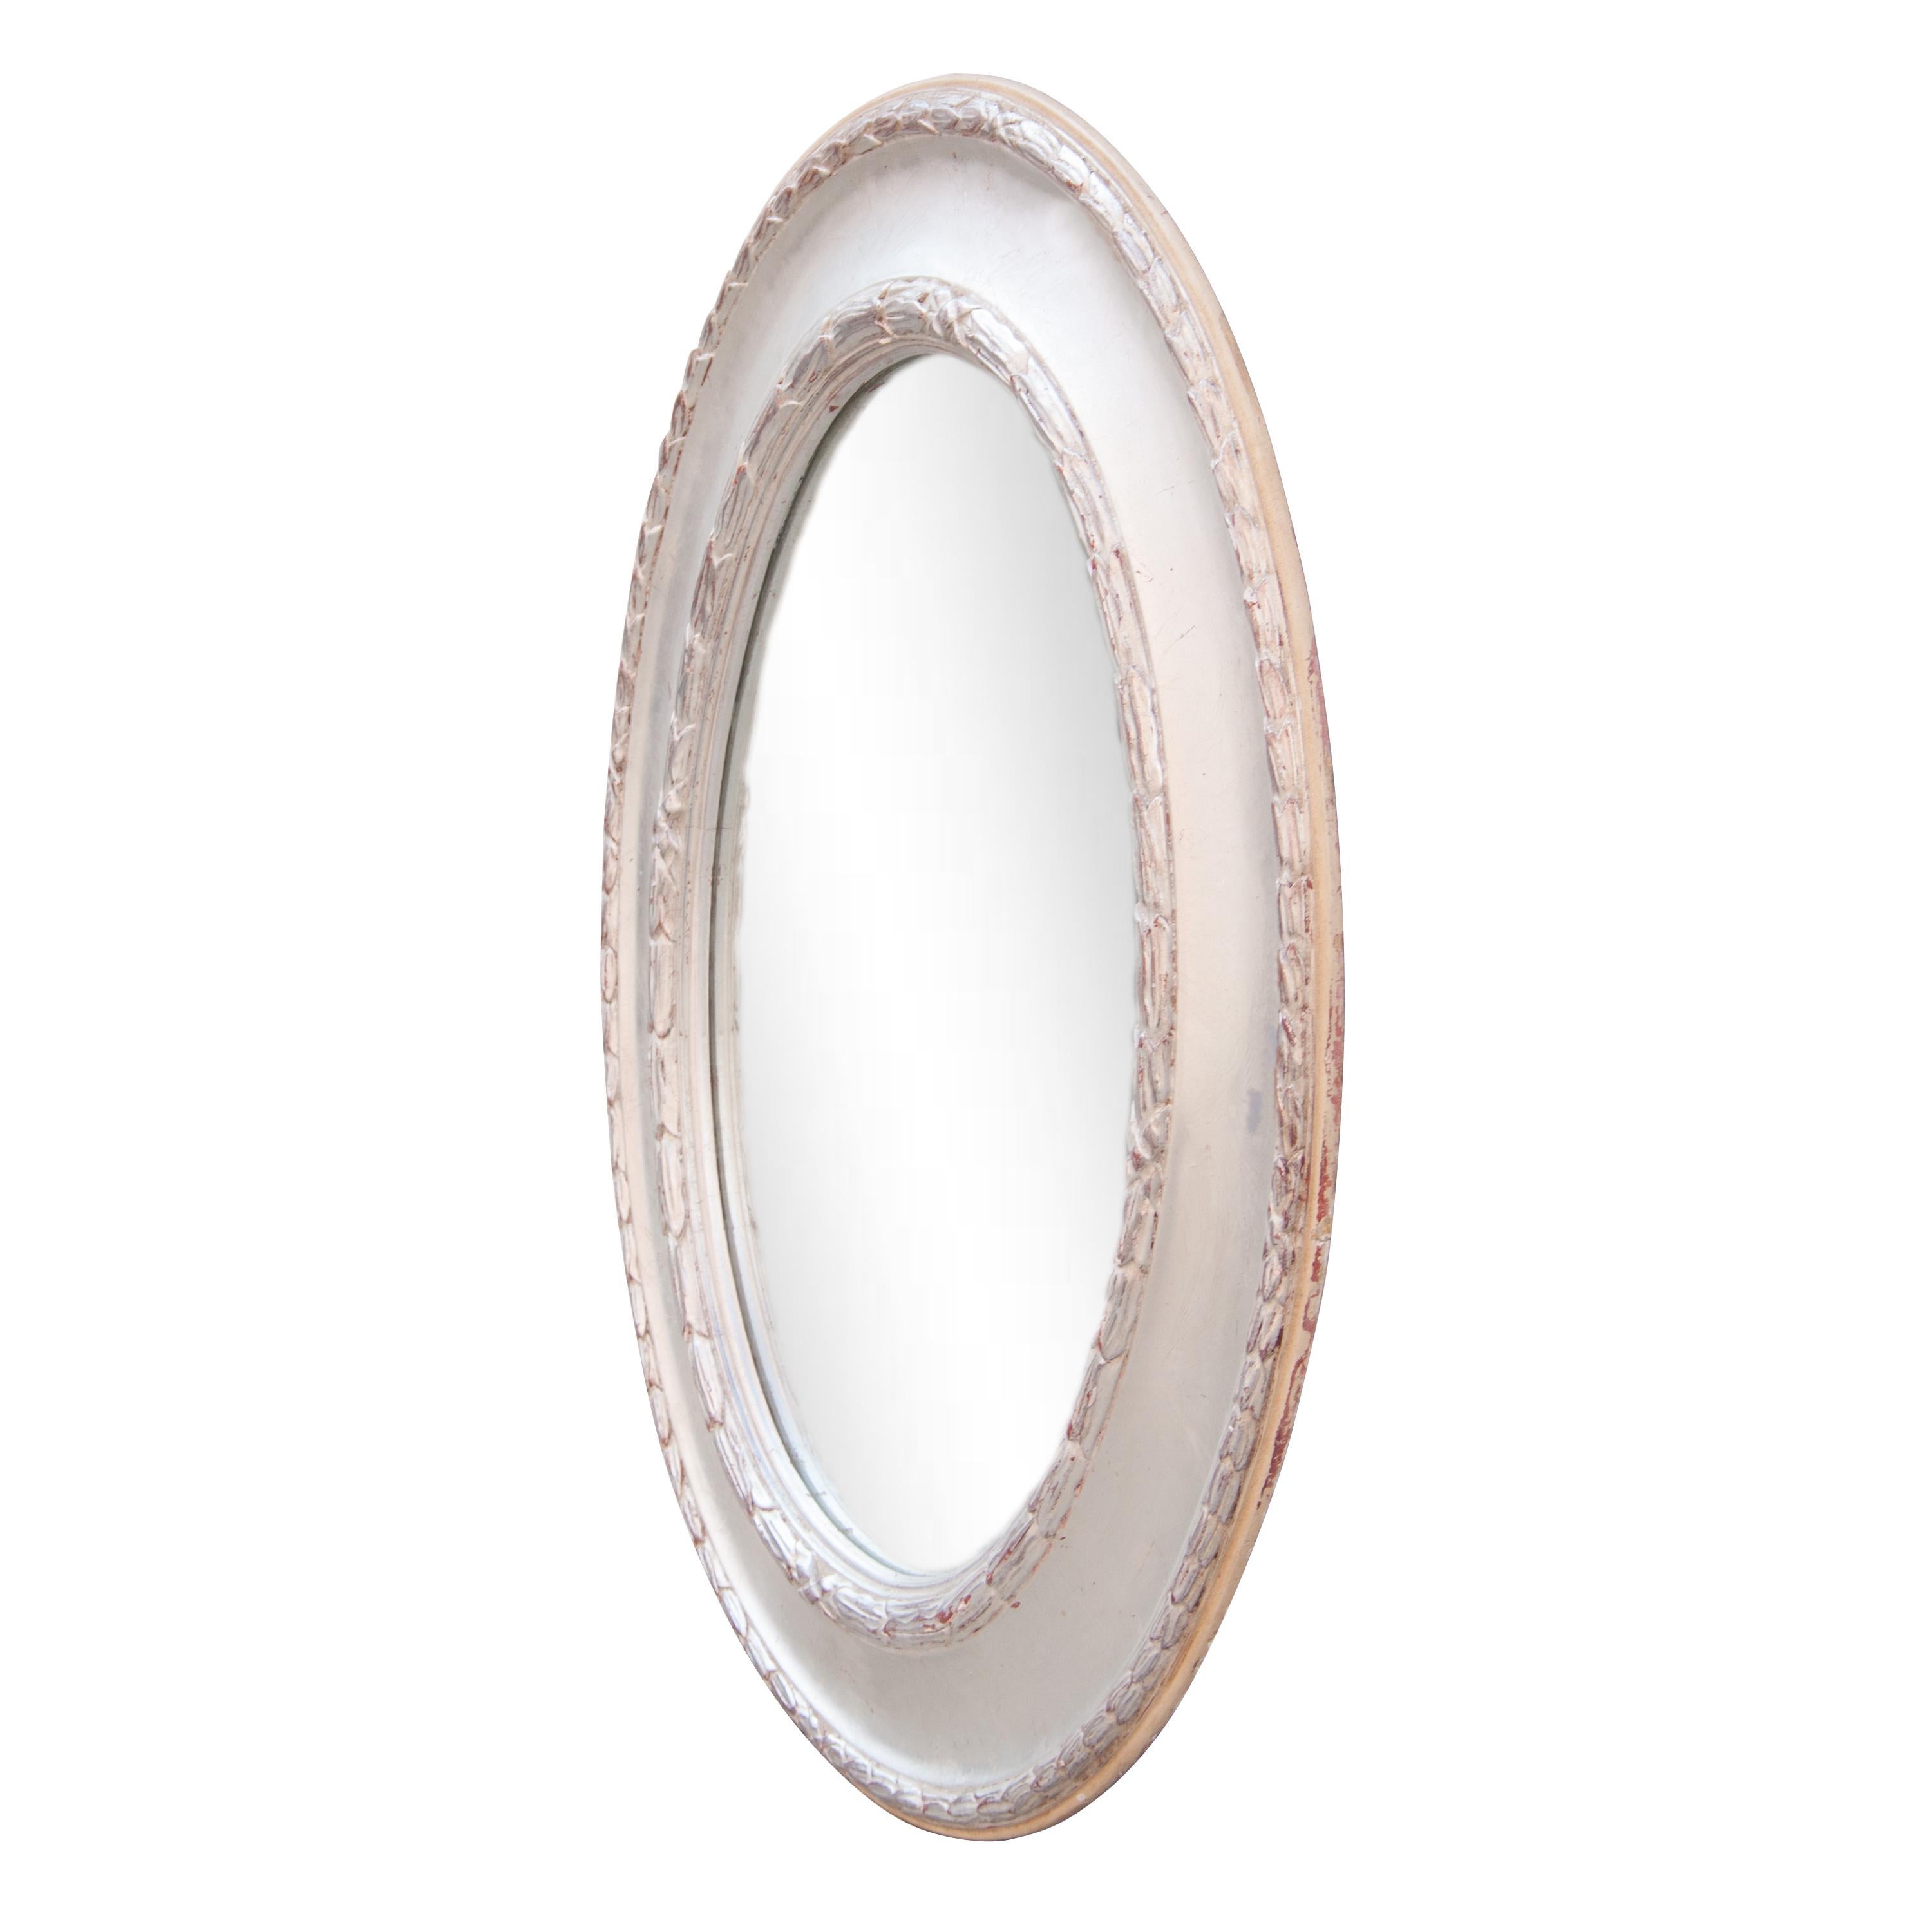 Neoclassical Regency style handcrafted mirror. Oval hand carved wooden structure with silver foiled finish, Spain, 1970.